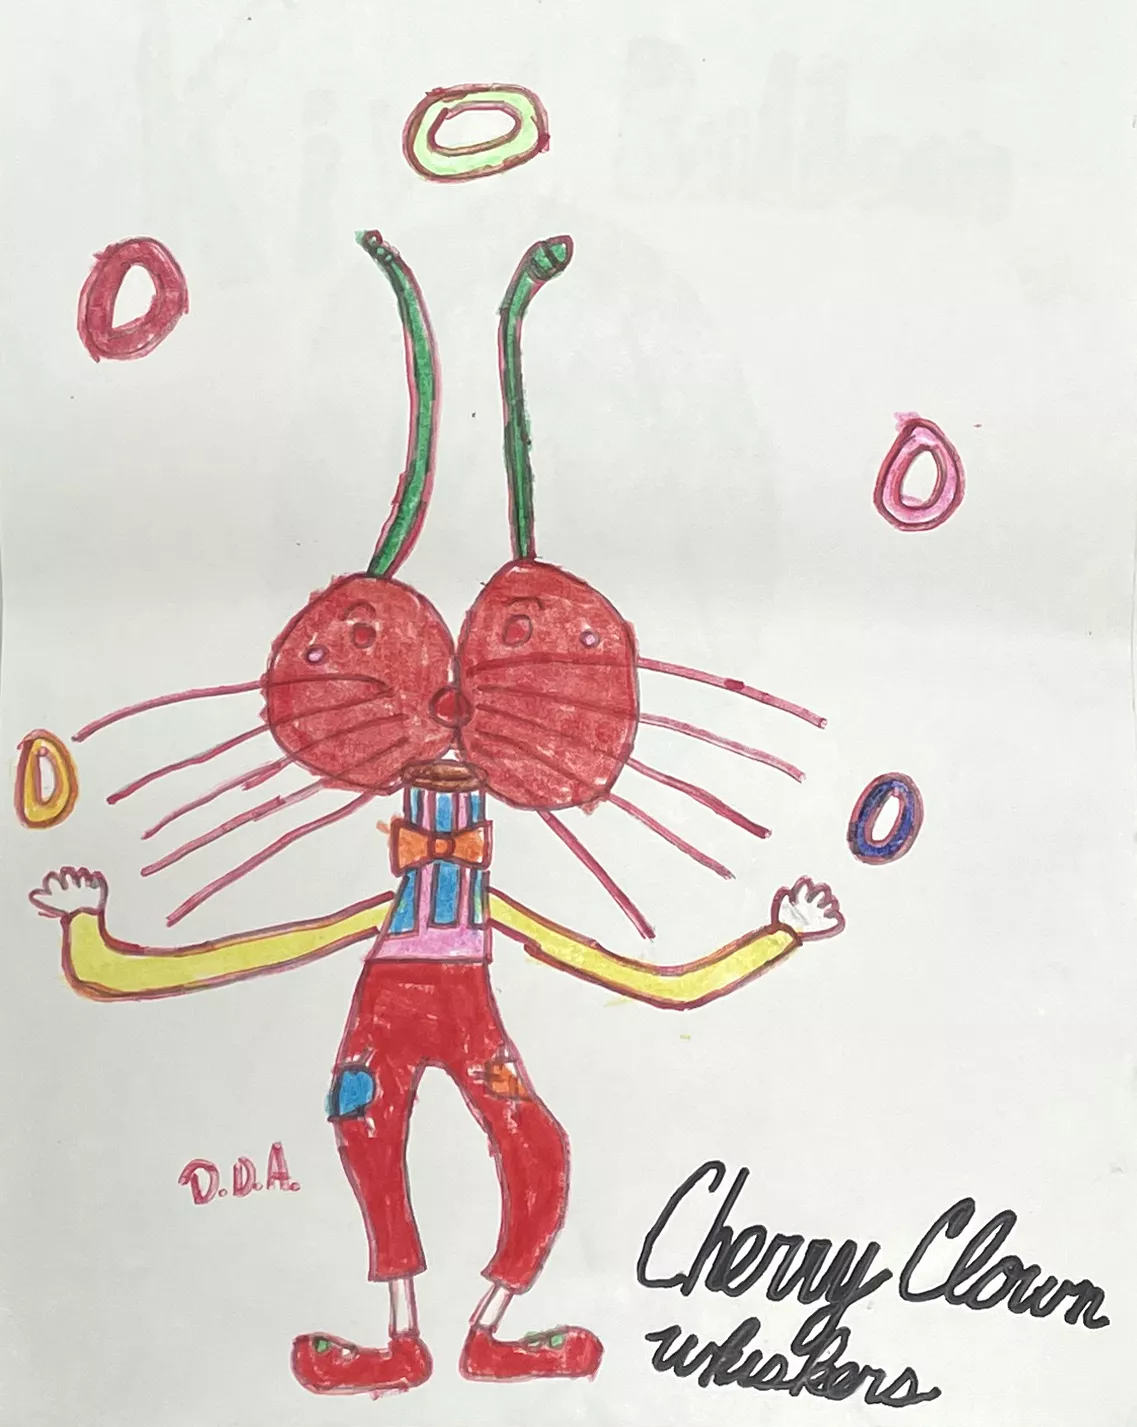 Darran Daughty Cherry Clown Whiskers, 2021 Sketchbook drawing of a clown with two cherries making their head and long whiskers from their cheeks. The drawing includes the text Cherry Clown Whiskers.  Marker and colored pencil on paper, 14” x 11”